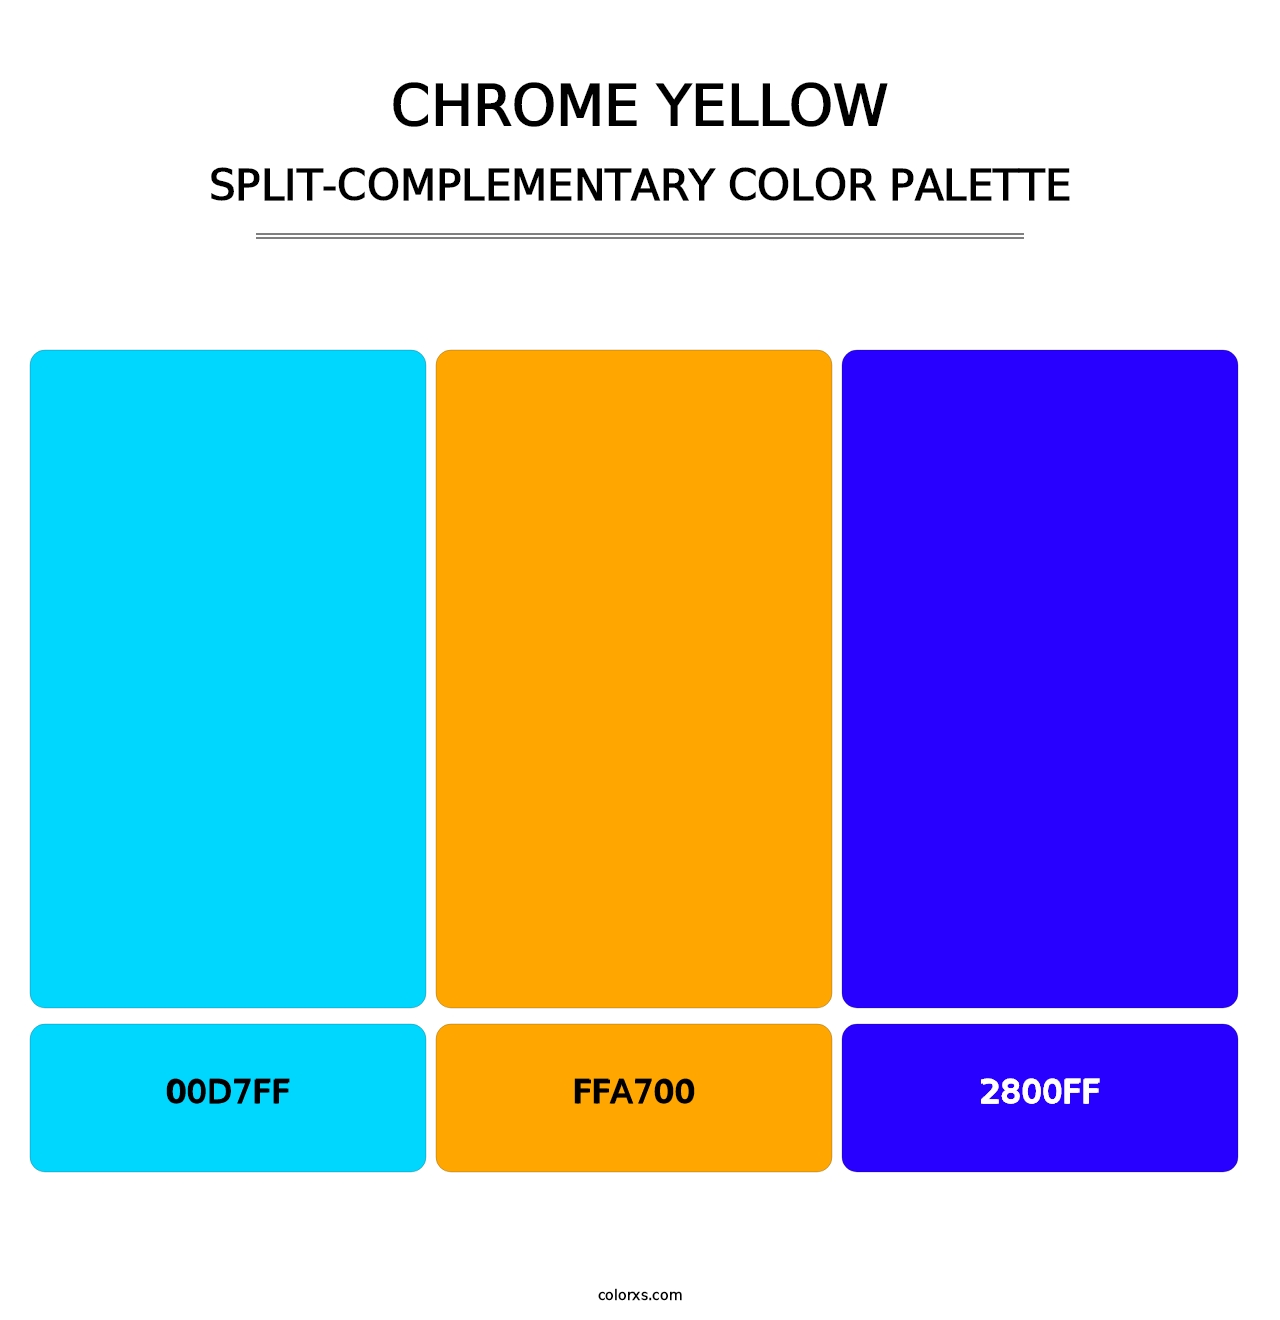 Chrome Yellow - Split-Complementary Color Palette